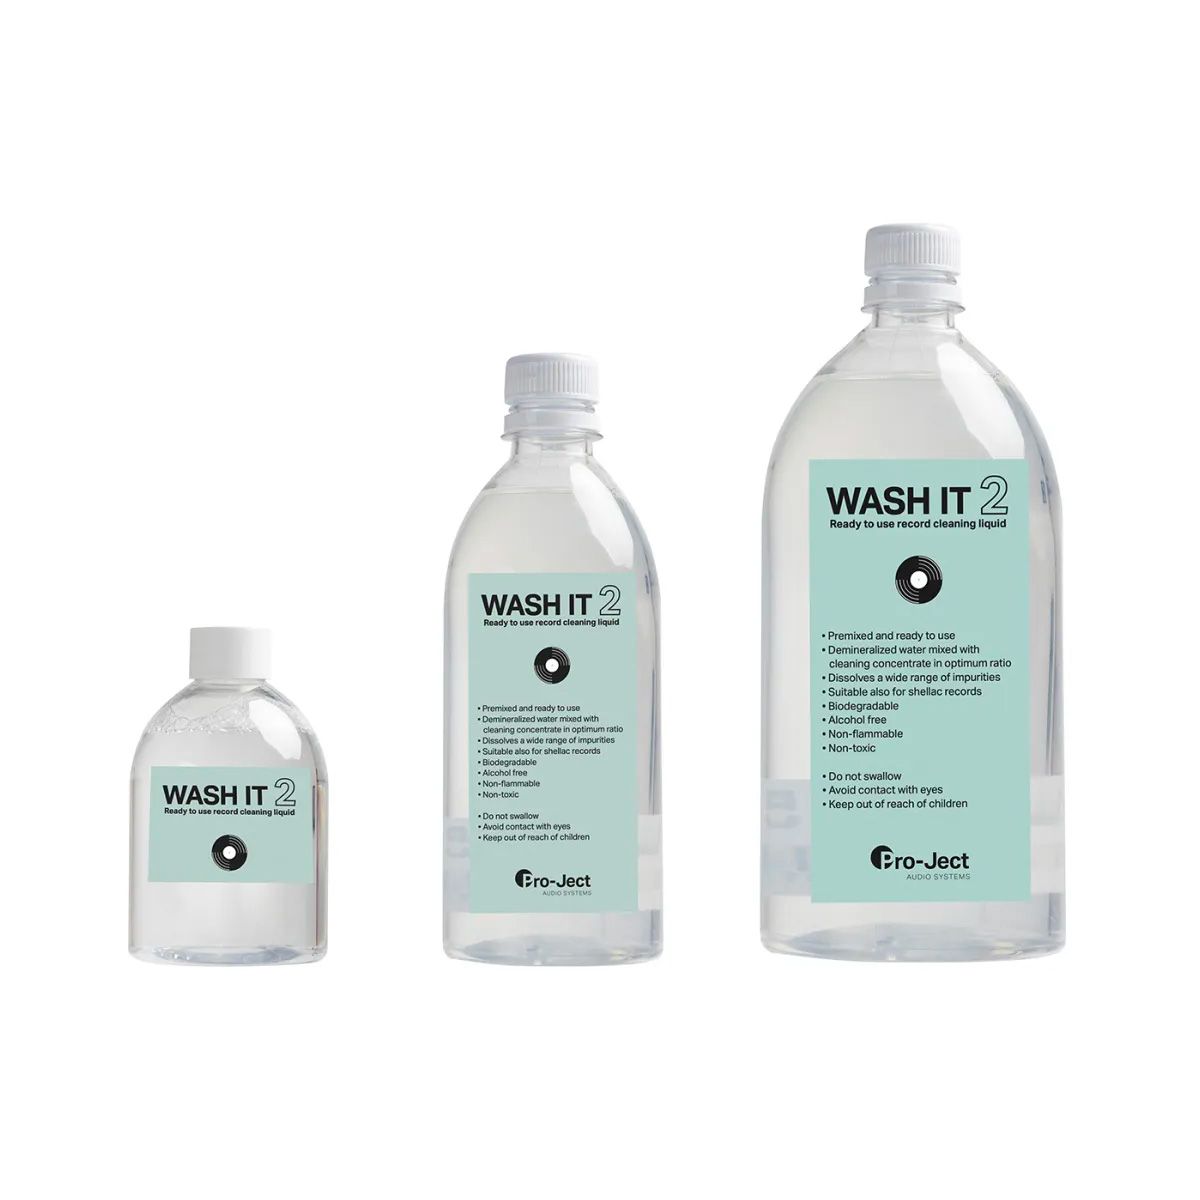 Pro-Ject Wash It 2 Eco-Friendly Record Cleaning Fluid - 100ML, 500ML, 1000ML lineup